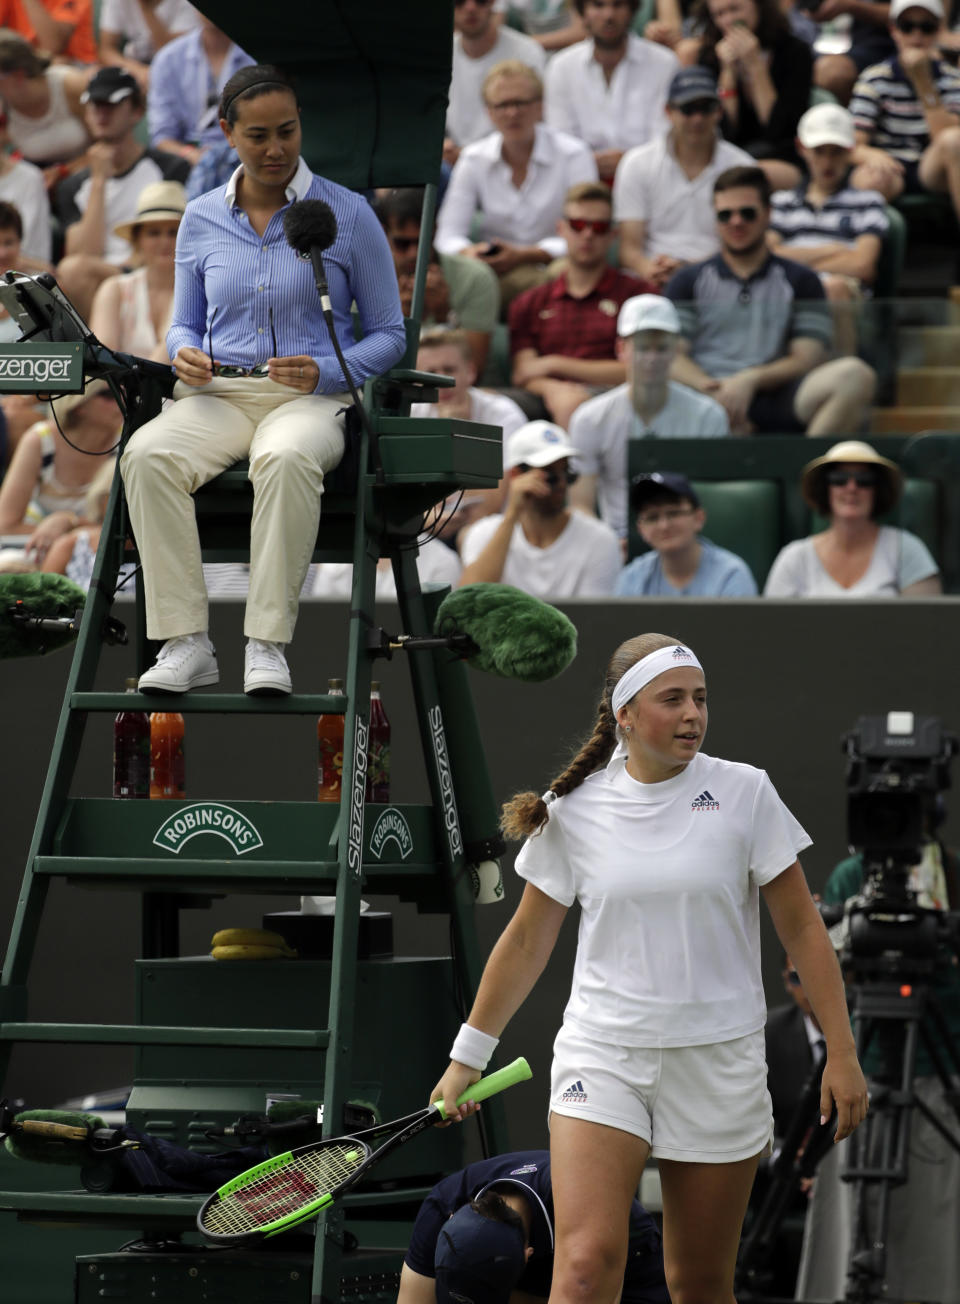 People couldn’t help but notice how similar her outfit was to the umpire’s. Photo: AAP